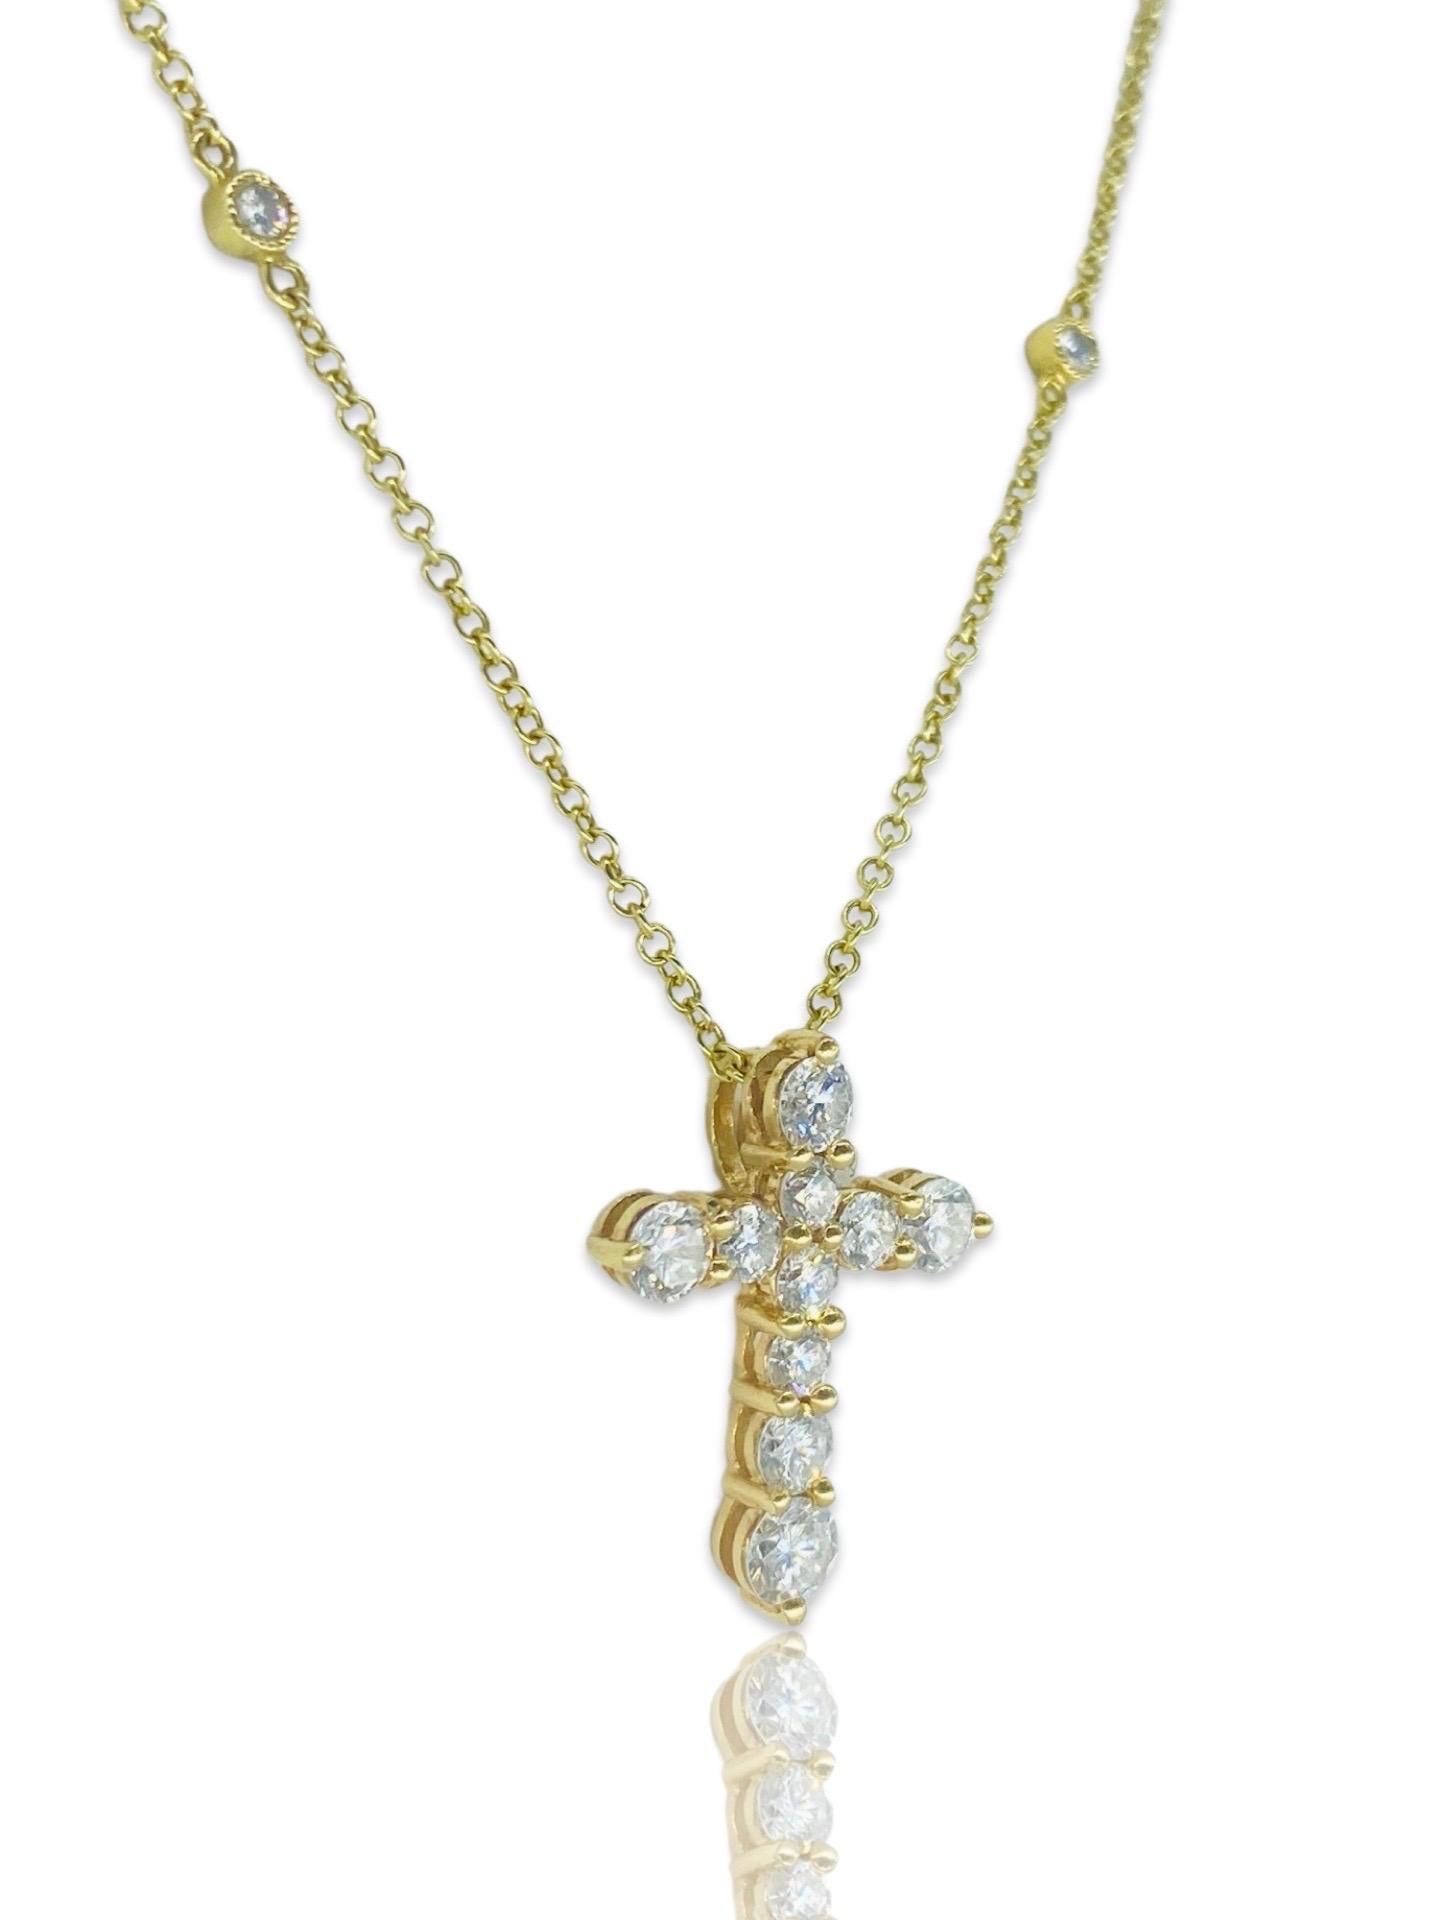 Designer 1.00 Carat Diamonds By The Yard Cross Pendant Necklace 18k Gold In Excellent Condition For Sale In Miami, FL